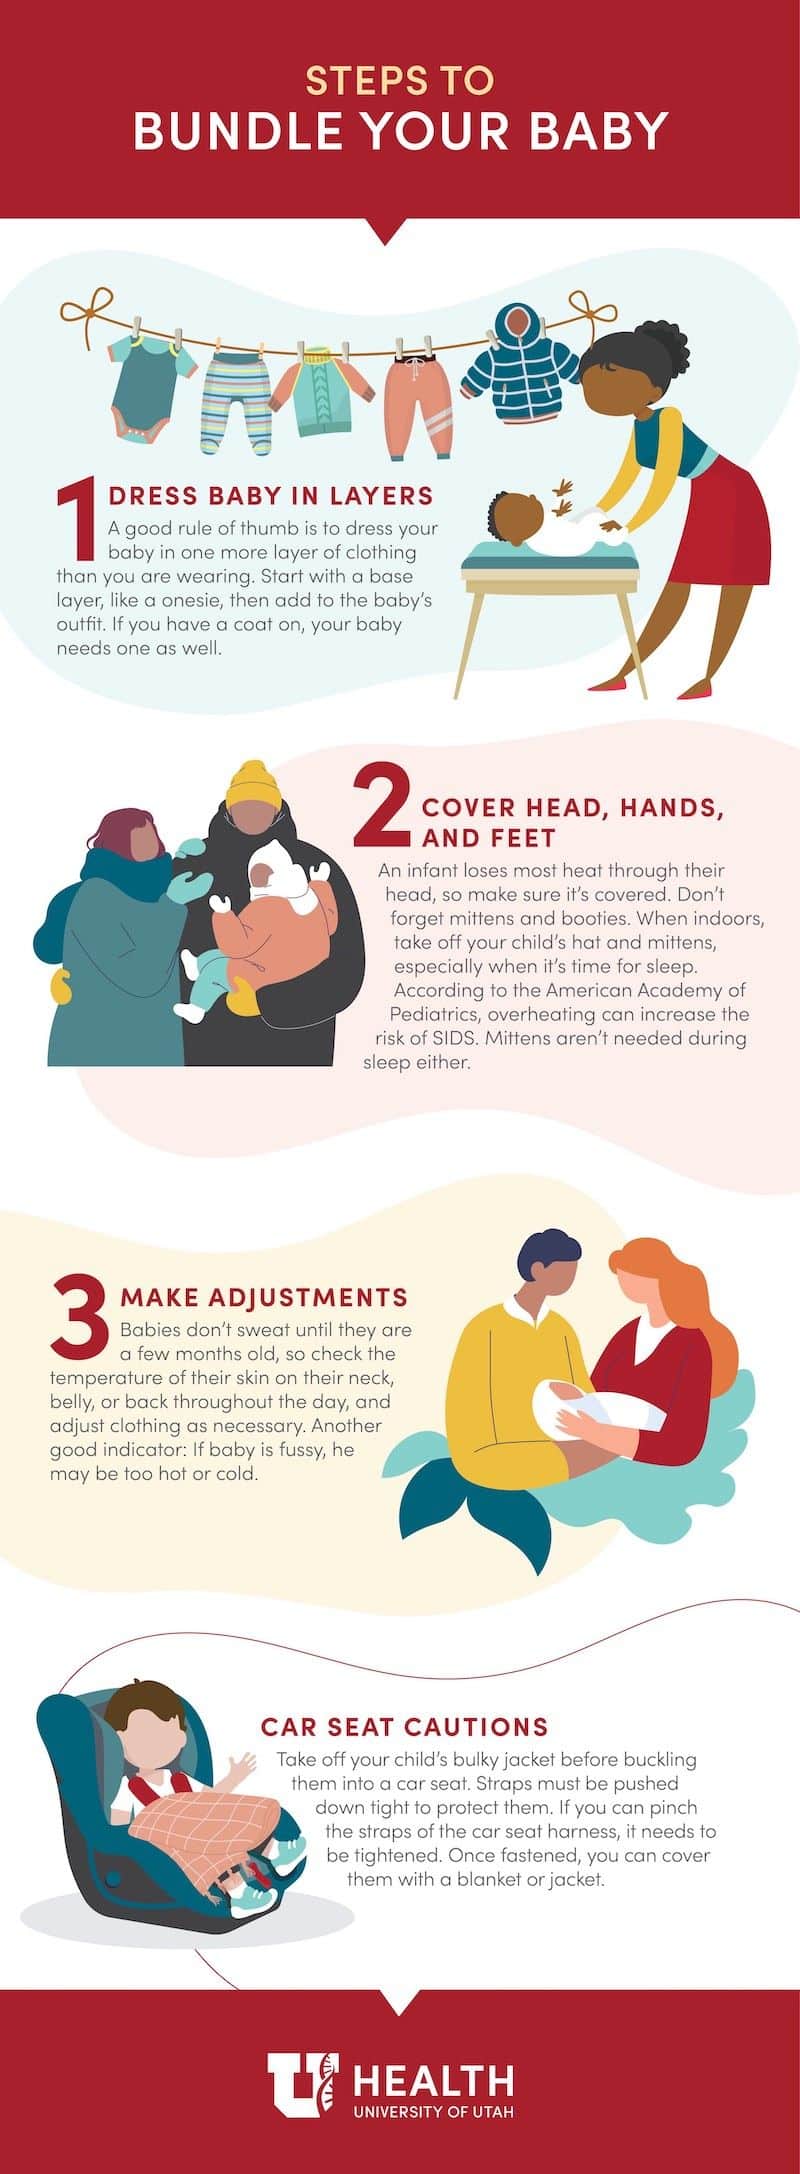 Pinterest post by Utah Health about how to safely bundle your baby. 